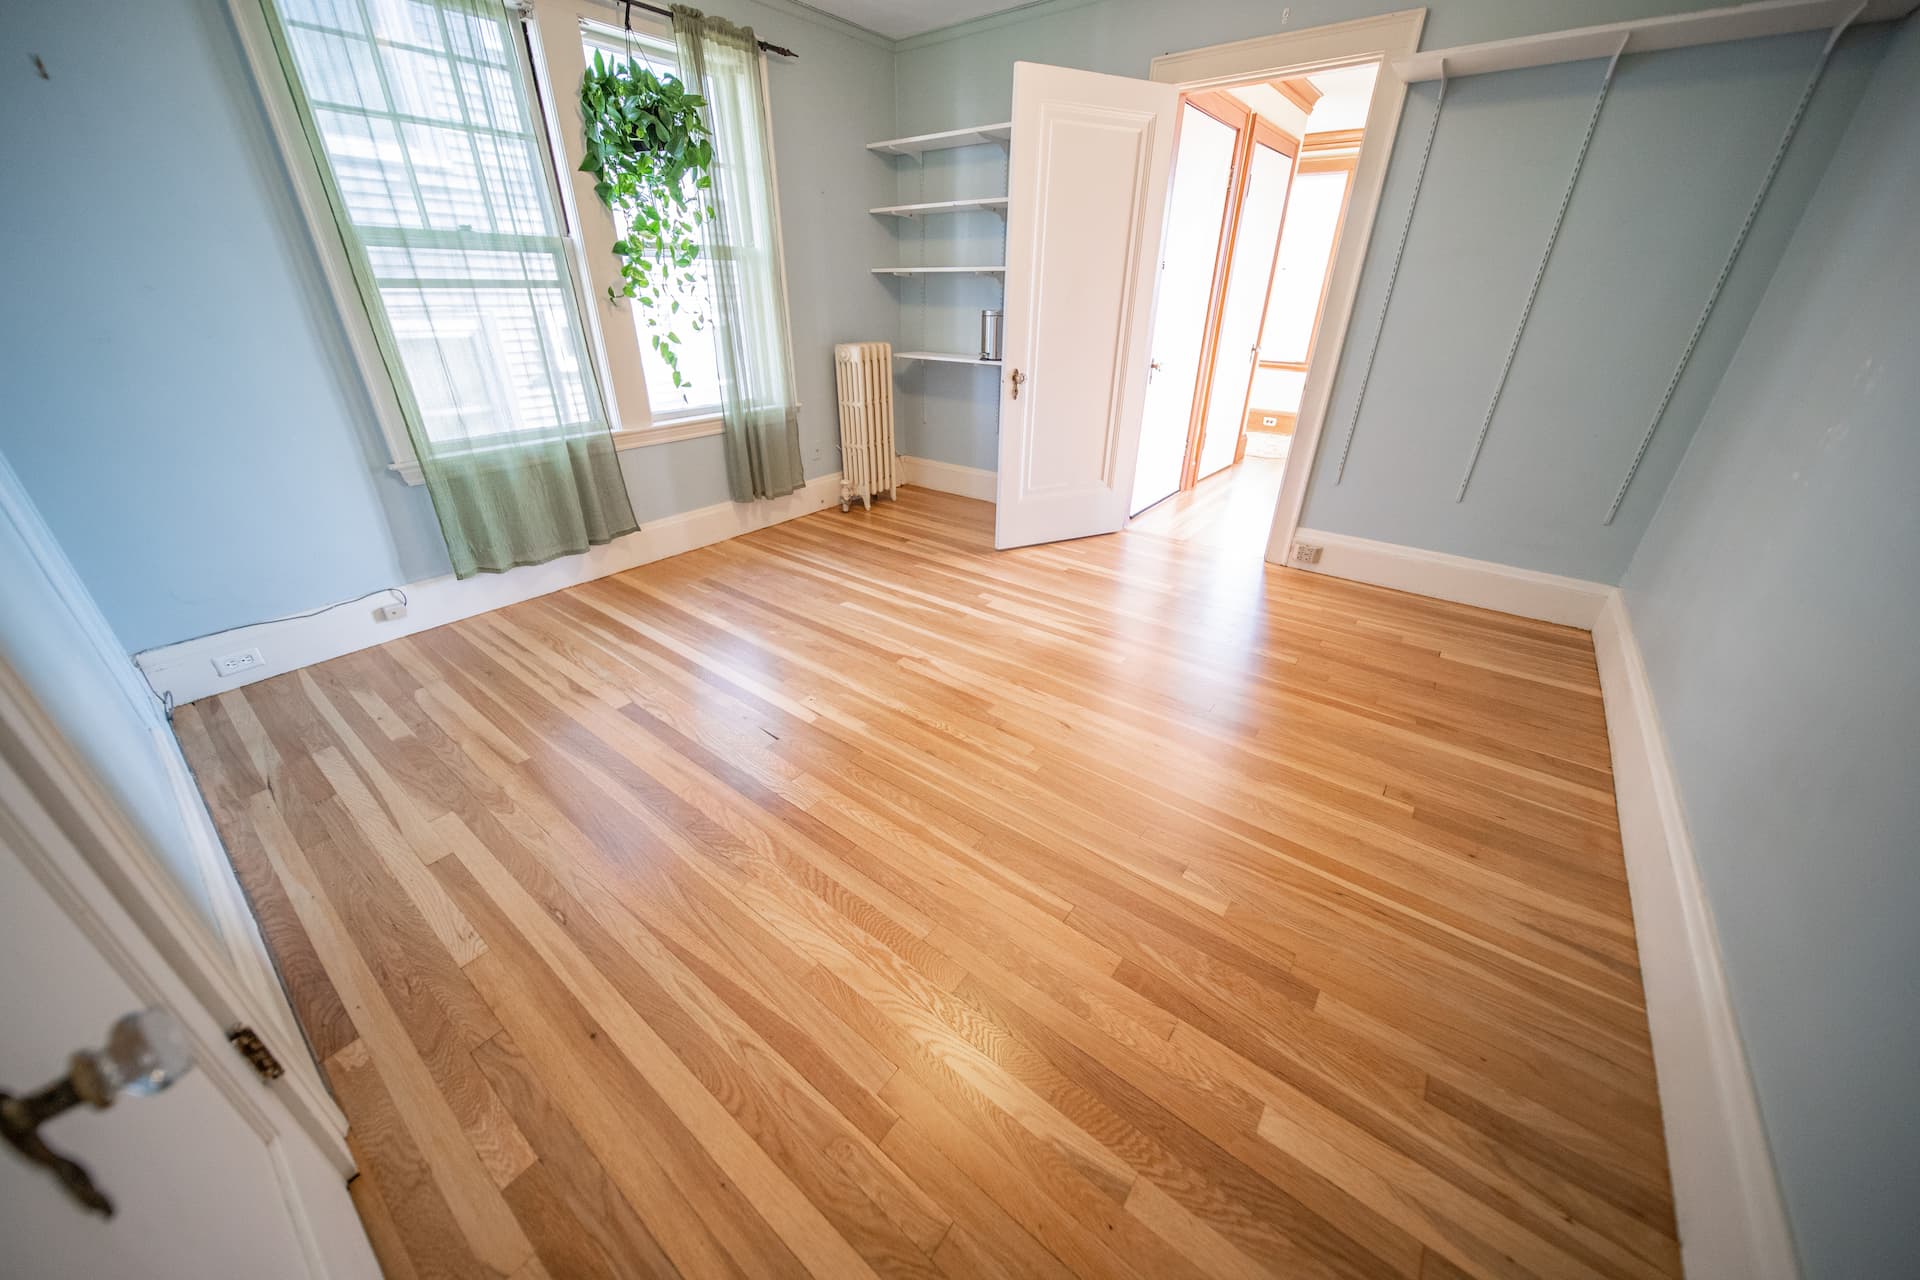 Spacious room with newly installed natural hardwood flooring by Weles Hardwood Flooring Company, showcasing a bright interior with a blue wall, green curtains, and sunlight streaming through windows, exemplifying quality craftsmanship in residential flooring projects.